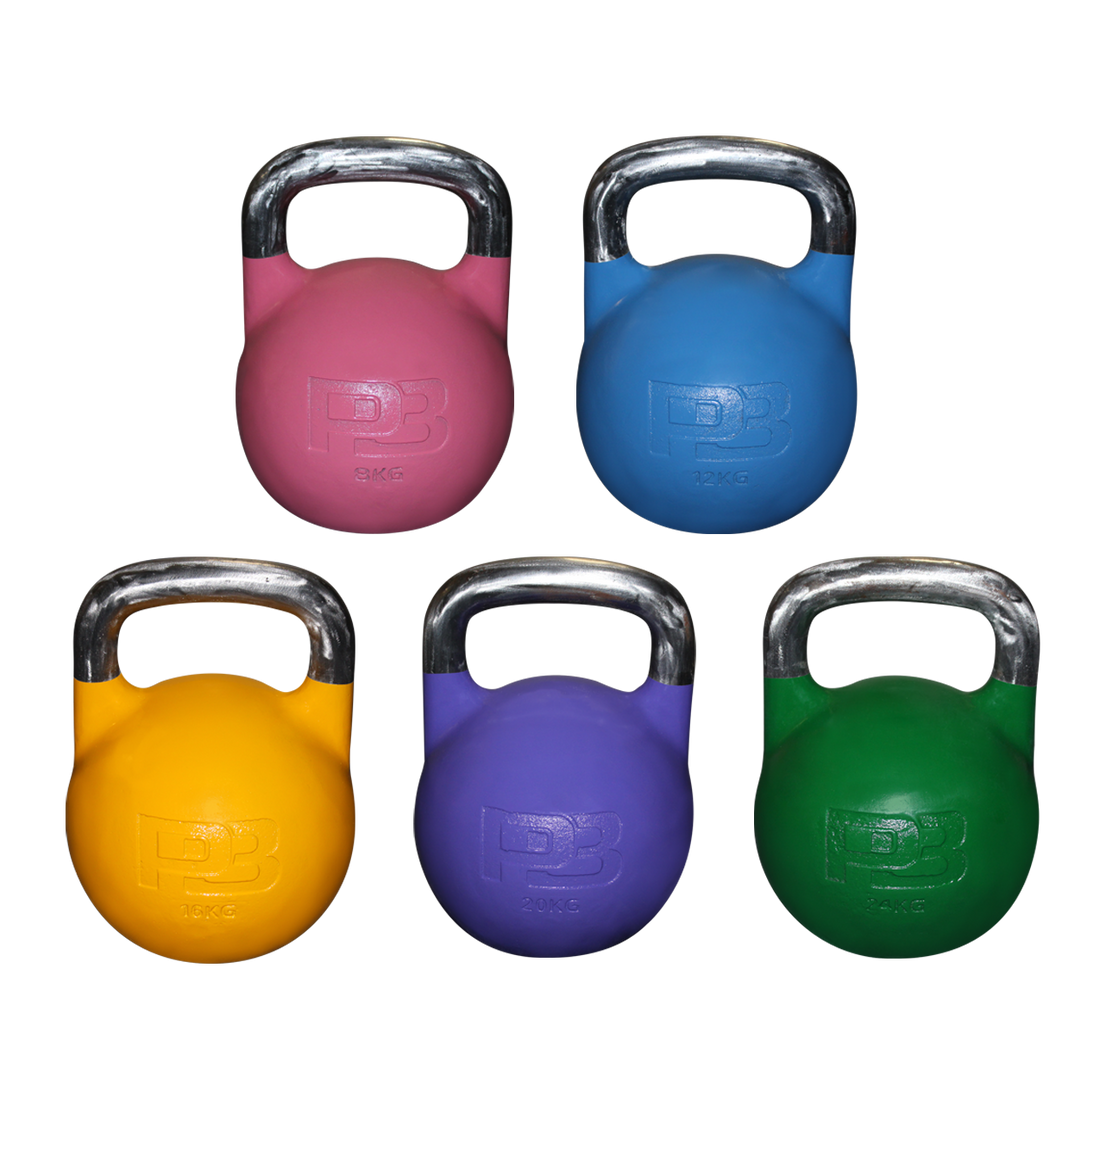 12 Best Kettlebell Exercises for a Total Body Workout